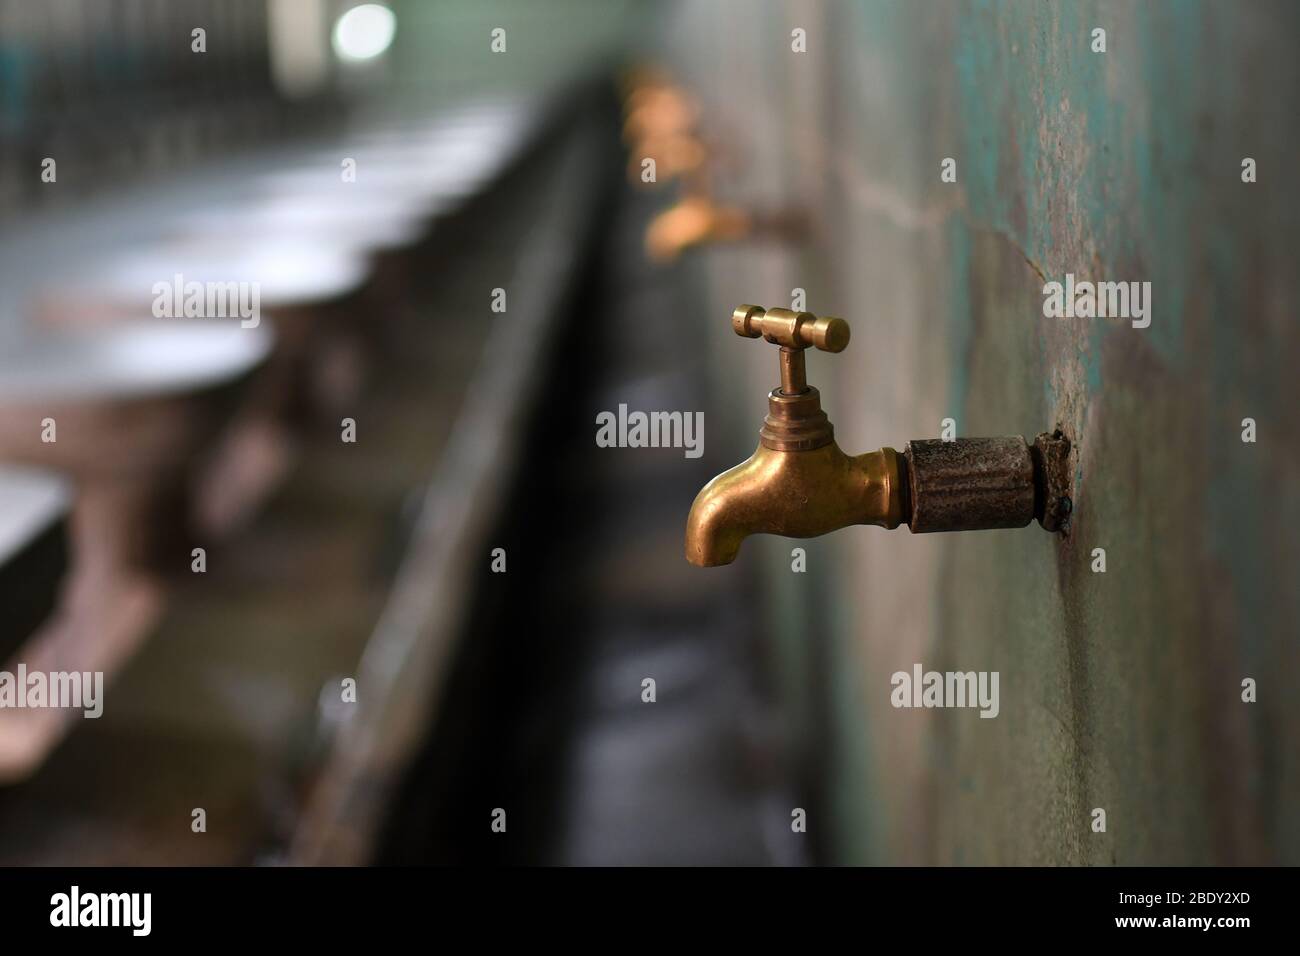 Dhaka 10 April 2020. View of an empty Ablution section inside the Baitul Mukarram National Mosque during the lockdown amid coronavirus outbreak in Dha Stock Photo